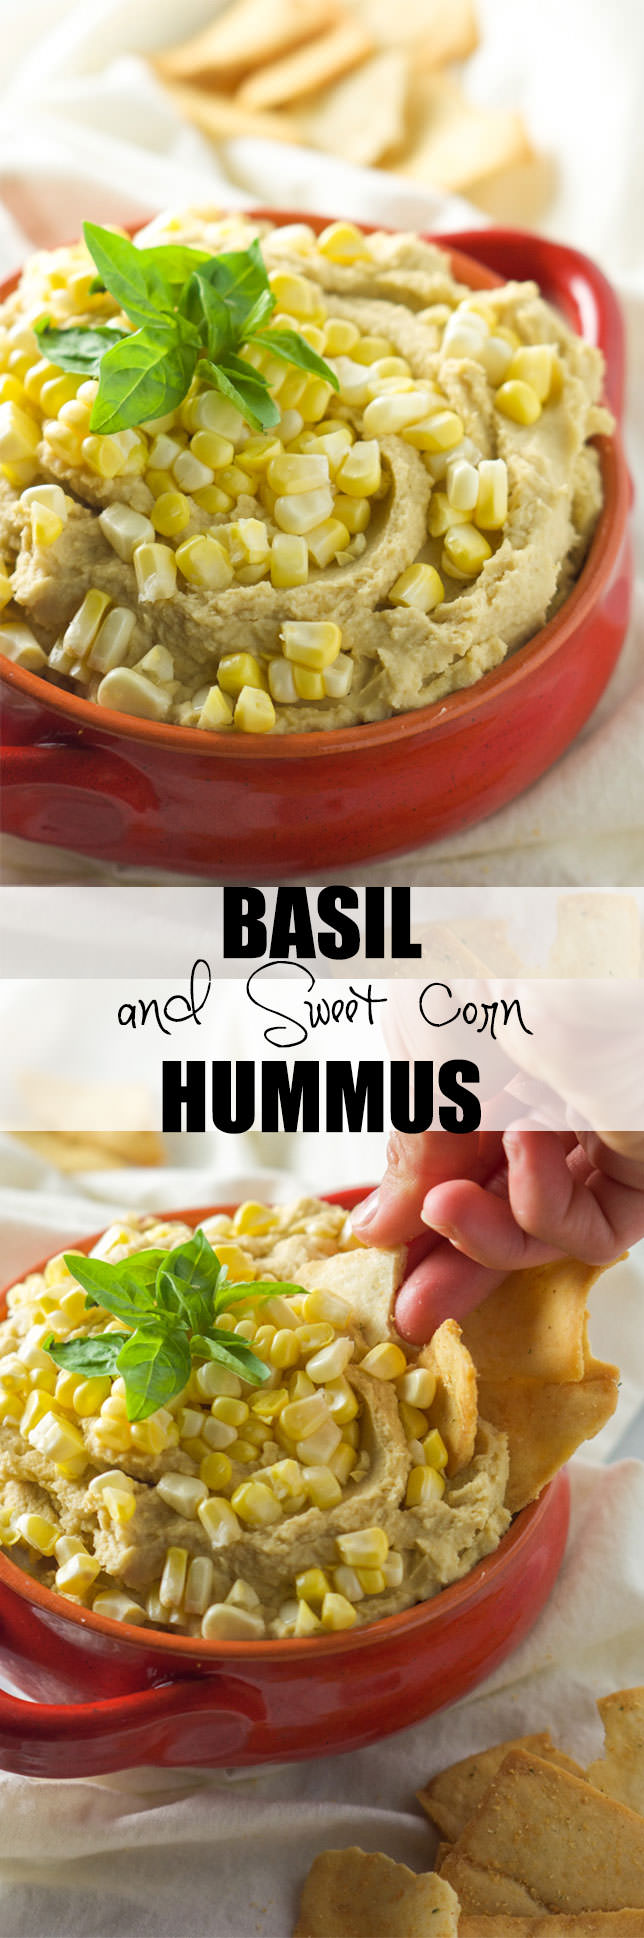 This Sweet Corn & Basil Hummus is filled with summer flavors and only takes 5 minutes to prepare!